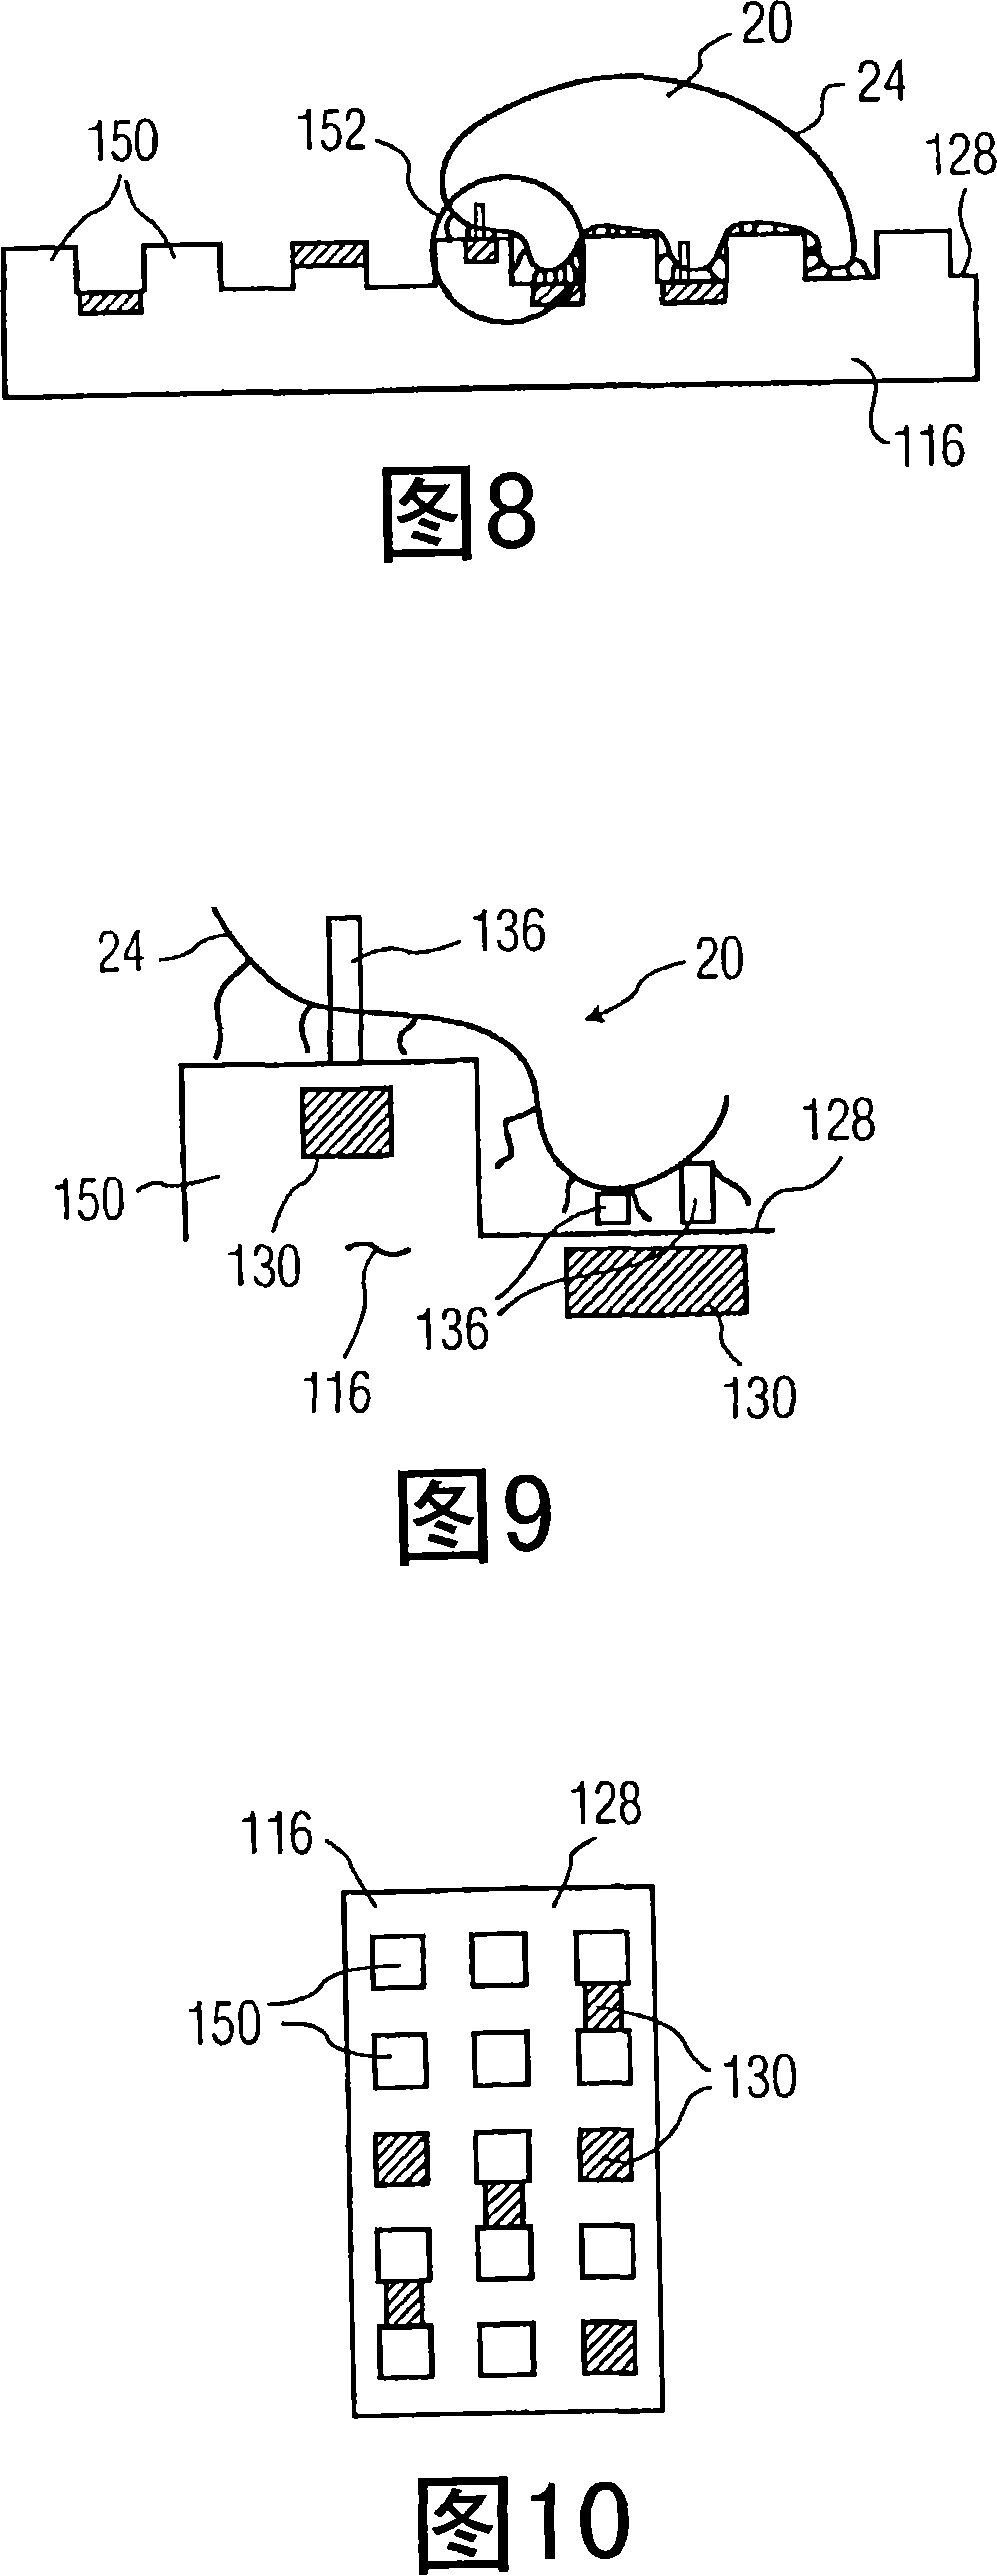 Apparatus and method for coupling implanted electrodes to nervous tissue